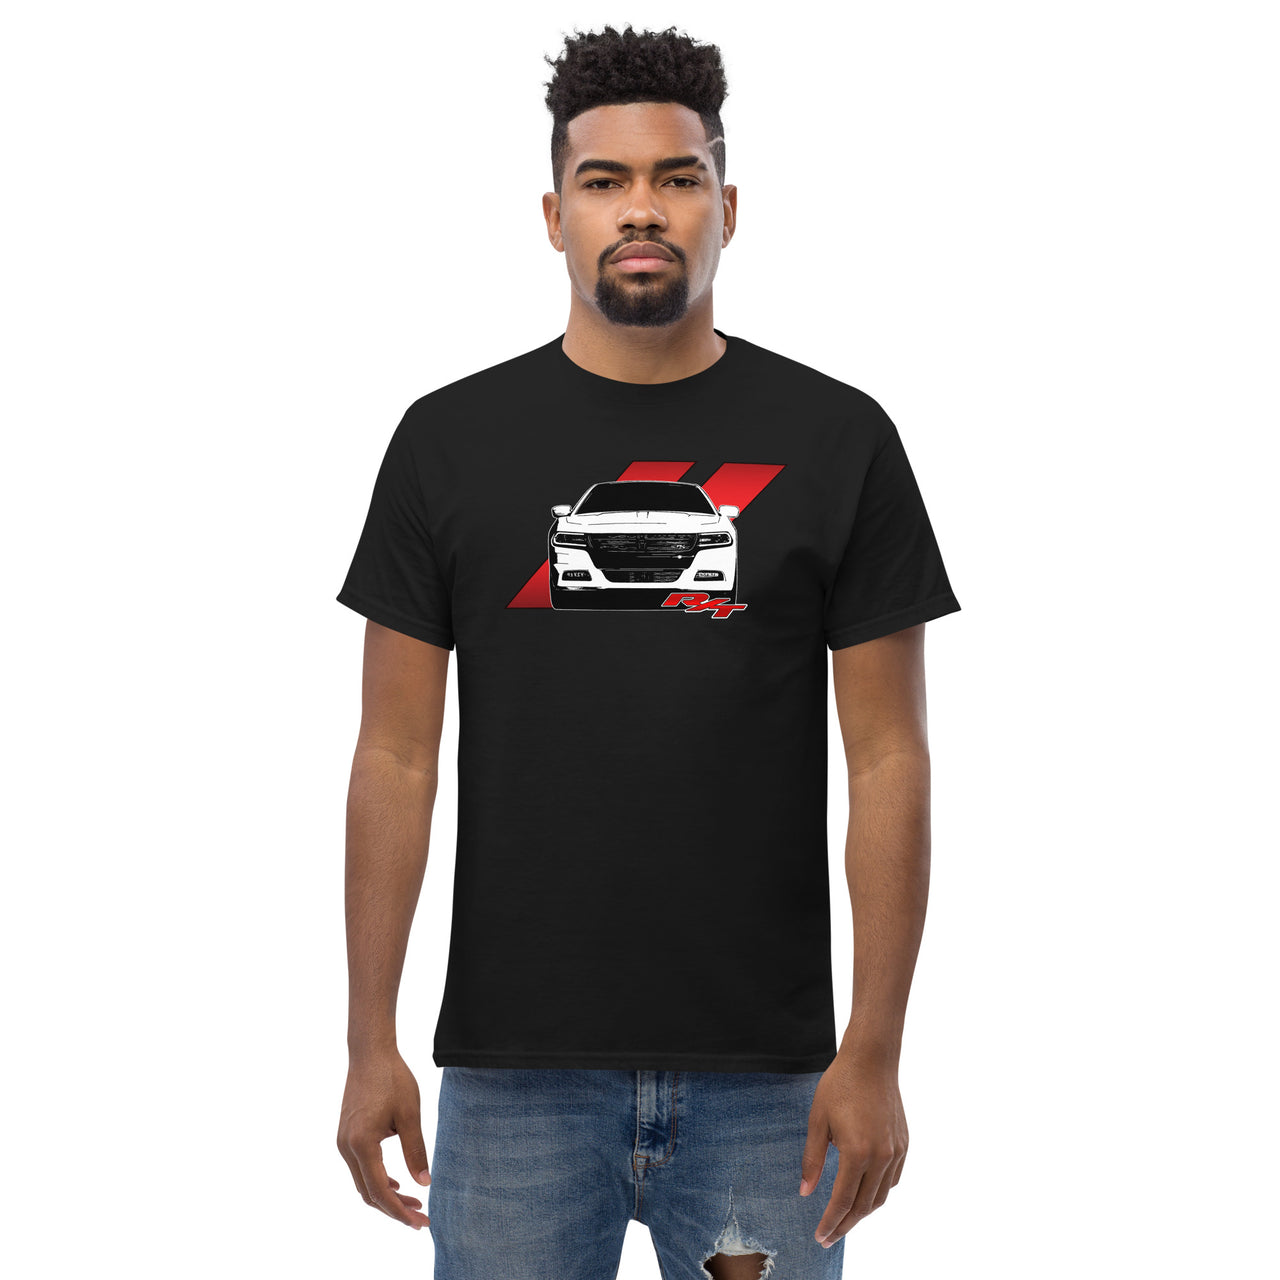 15-19 Charger R/T T-Shirt in black